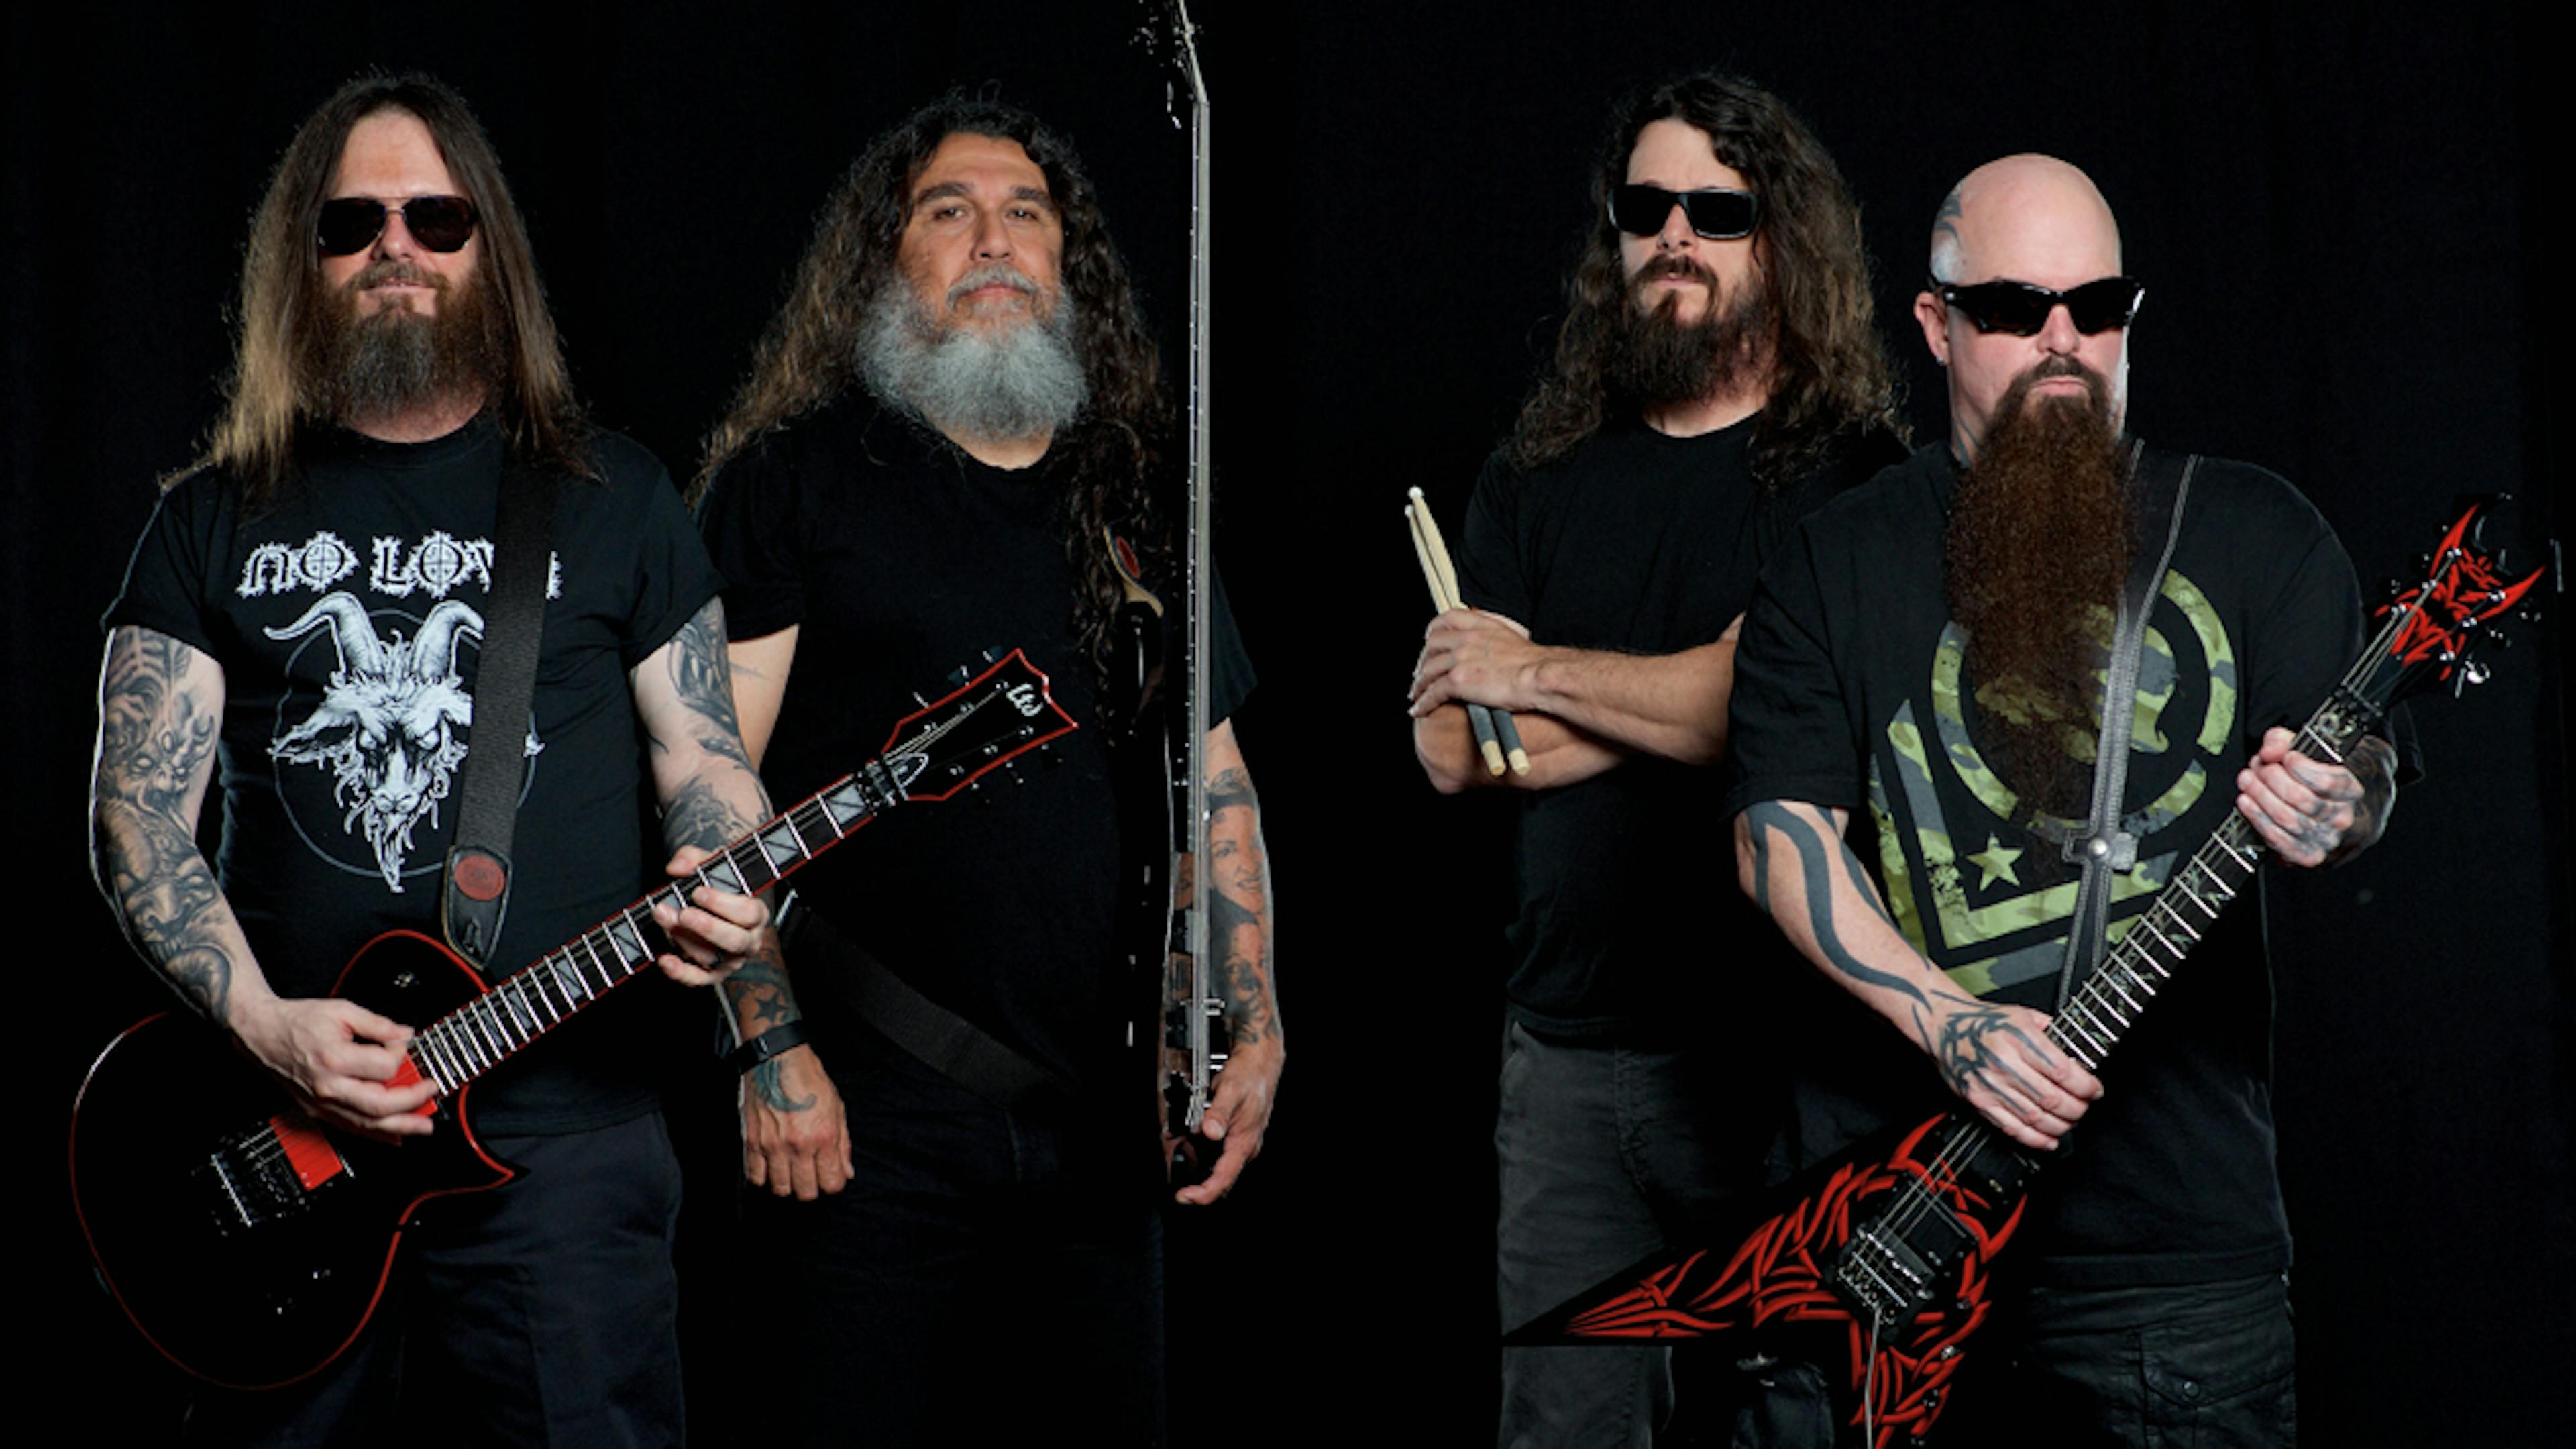 Slayer are reuniting to headline Louder Than Life festival